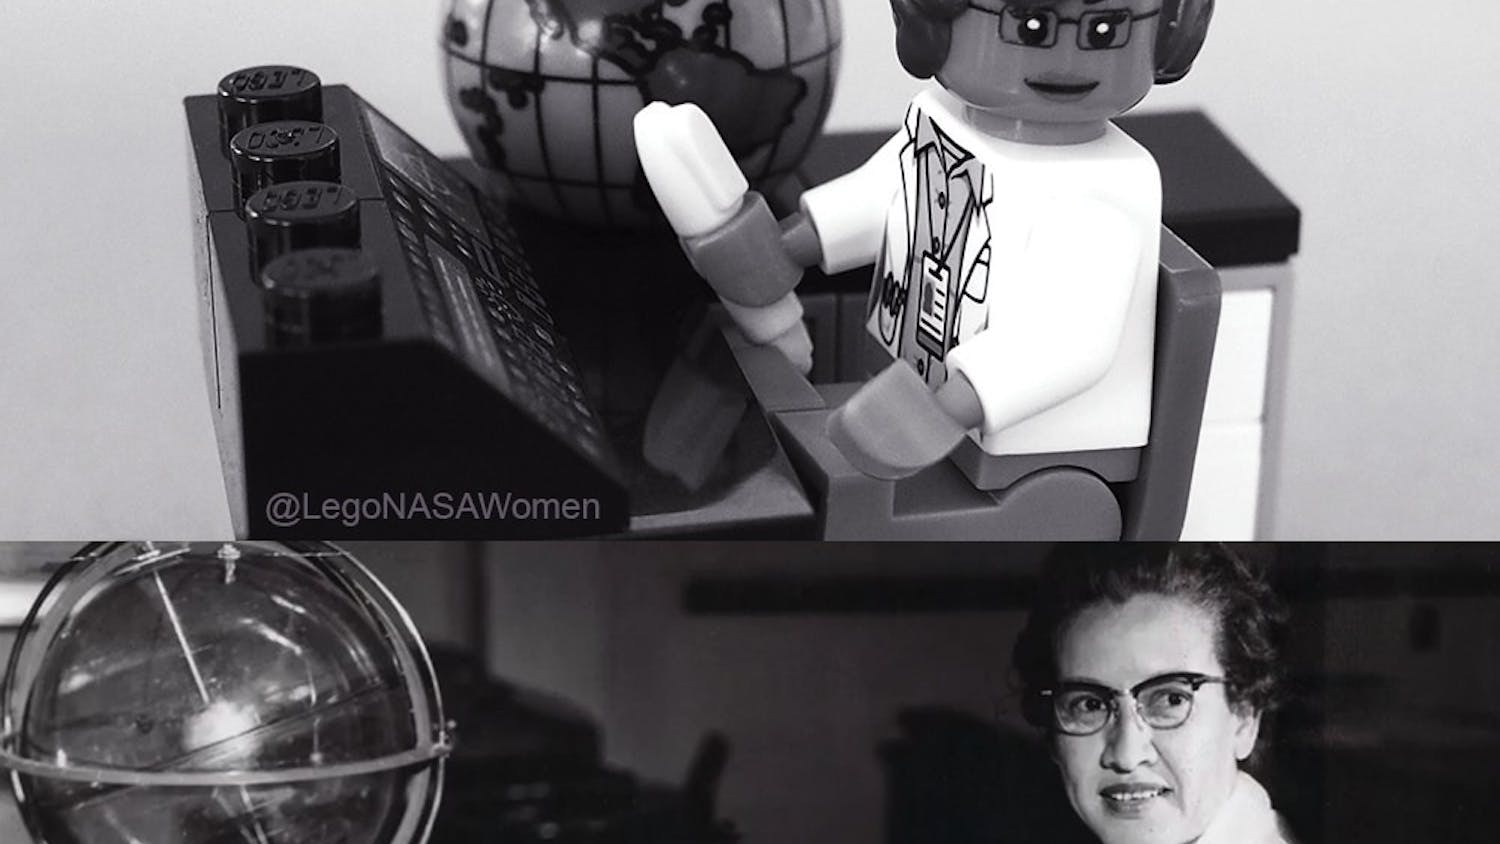 Katherine Johnson was made into a LEGO figure. Johnson was a longtime NASA researcher and known for calculating and verifying trajectories for the Mercury and Apollo programs &mdash; including the Apollo 11 mission that first landed humans on the moon. Photo courtesy of Maia Weinstock.